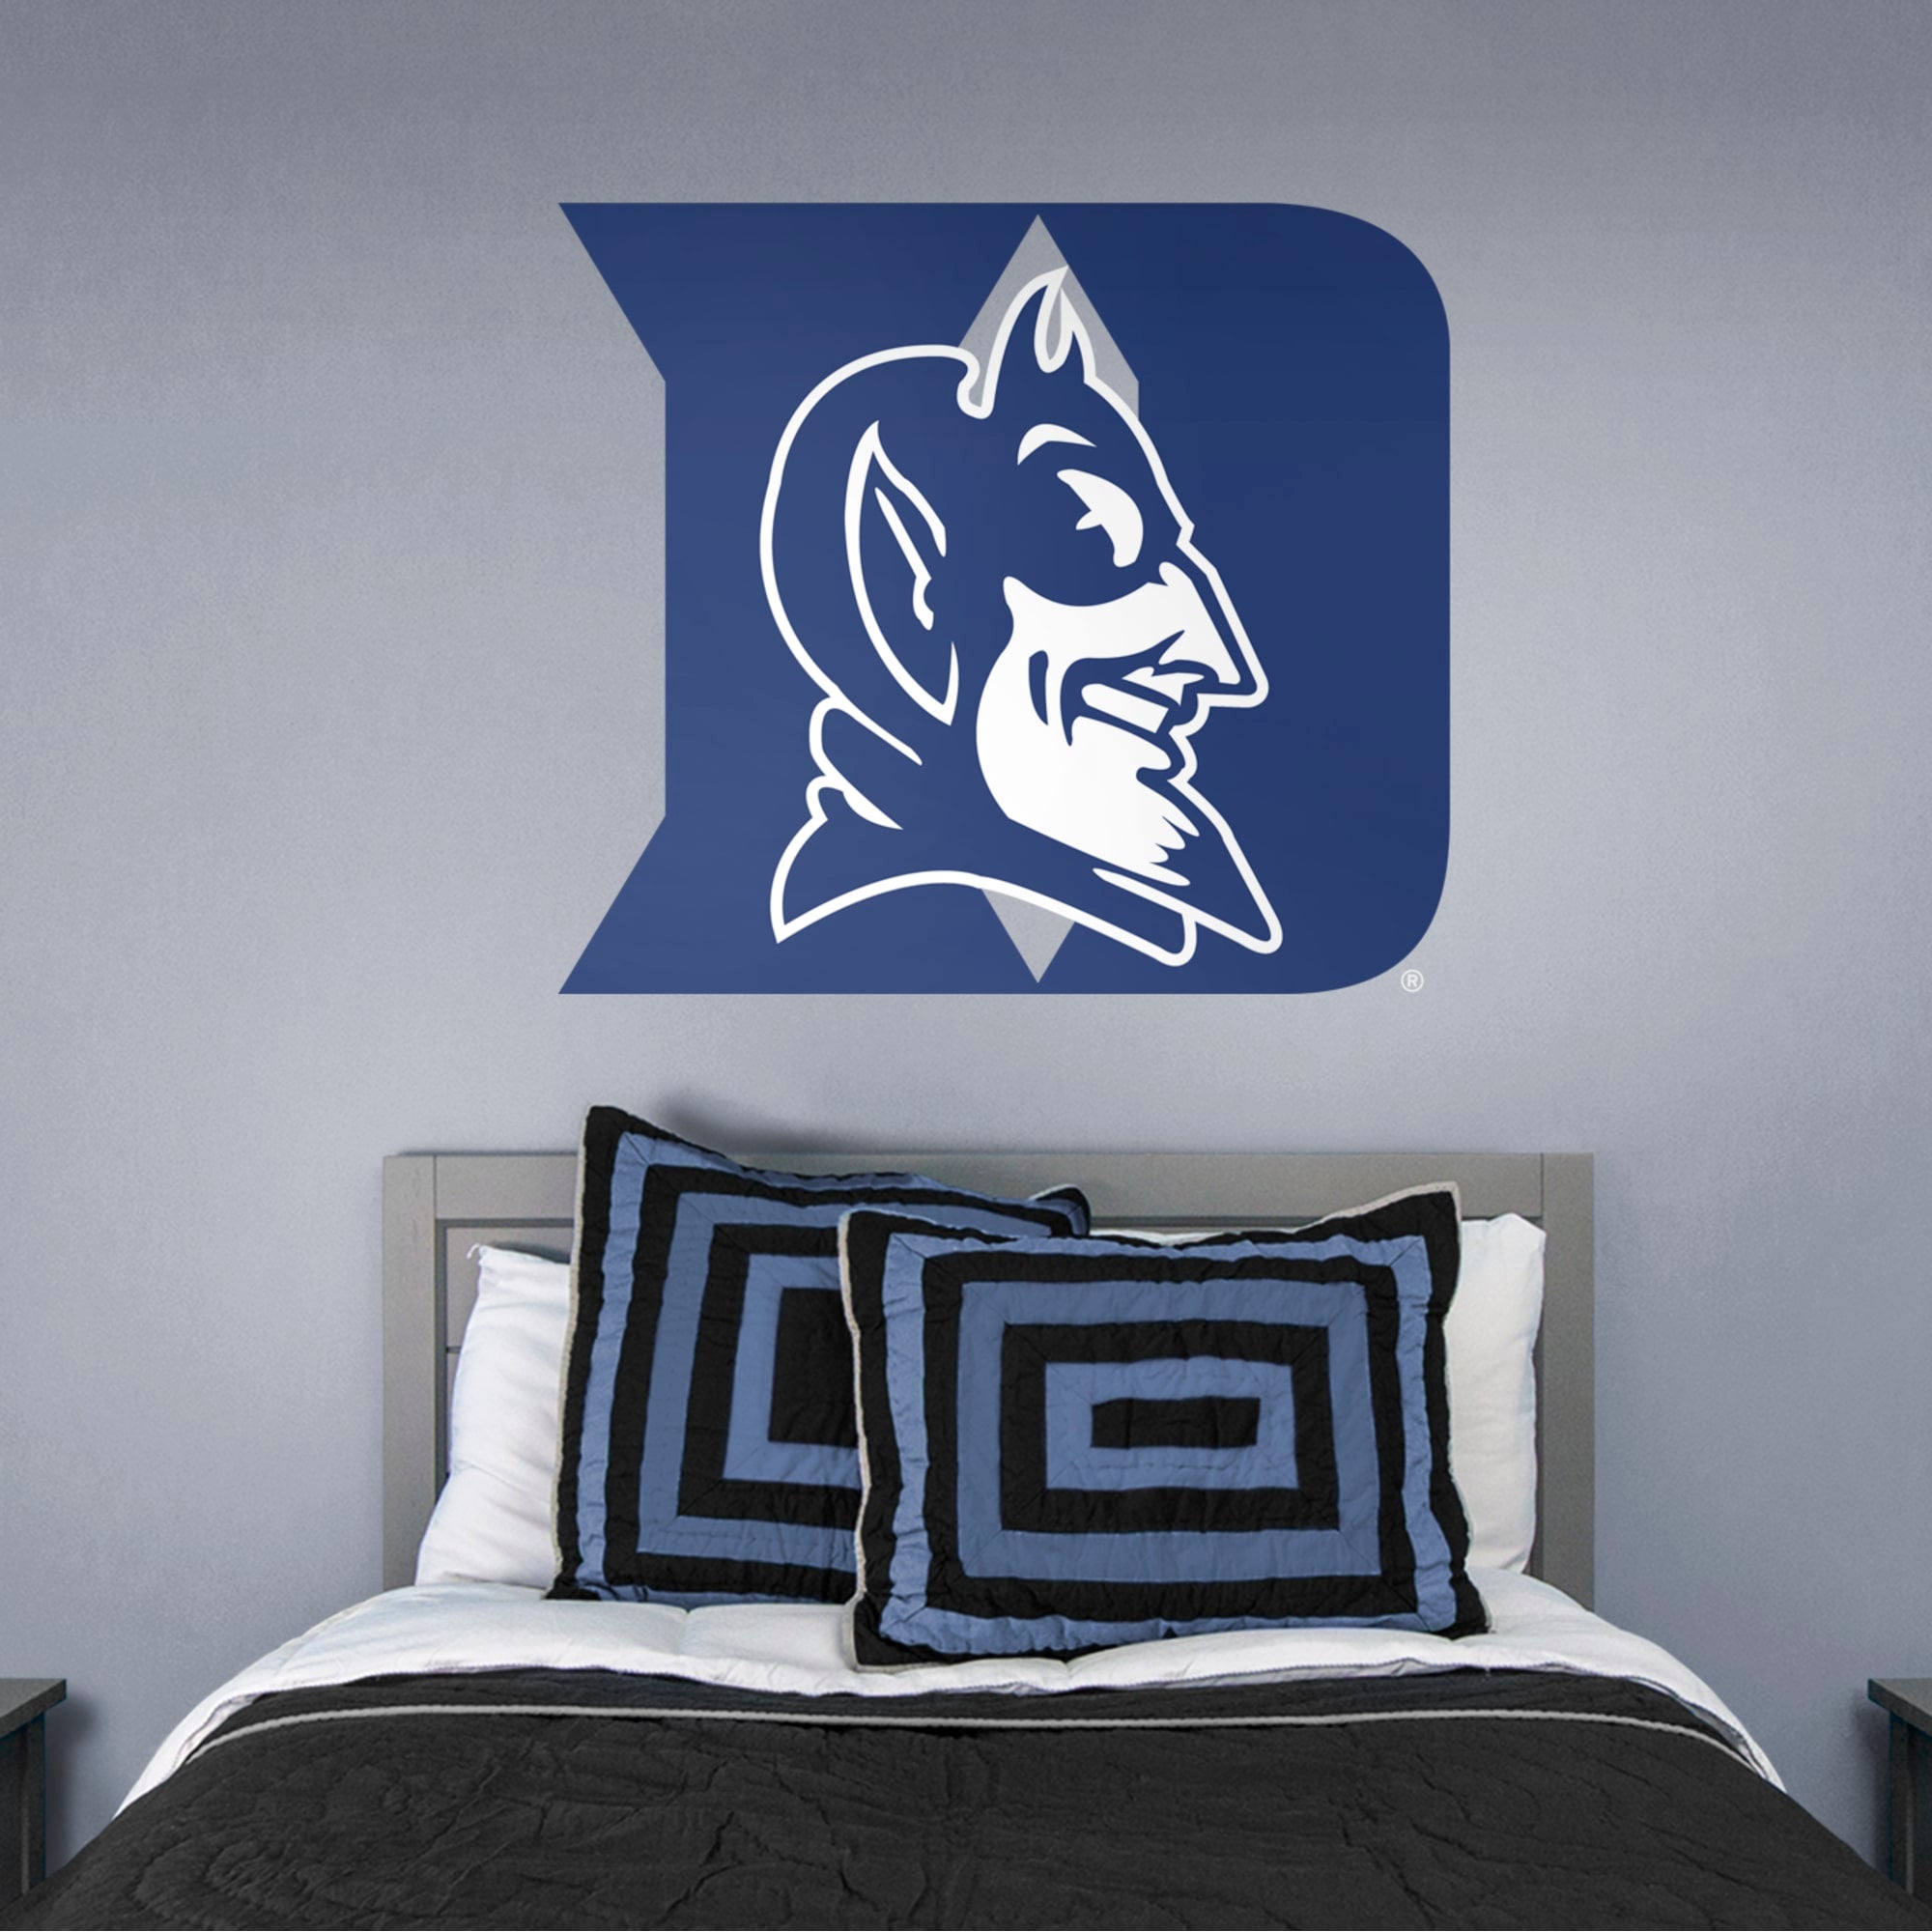 Duke Blue Devils: Logo - Officially Licensed Removable Wall Decal 44.0"W x 39.0"H by Fathead | Vinyl